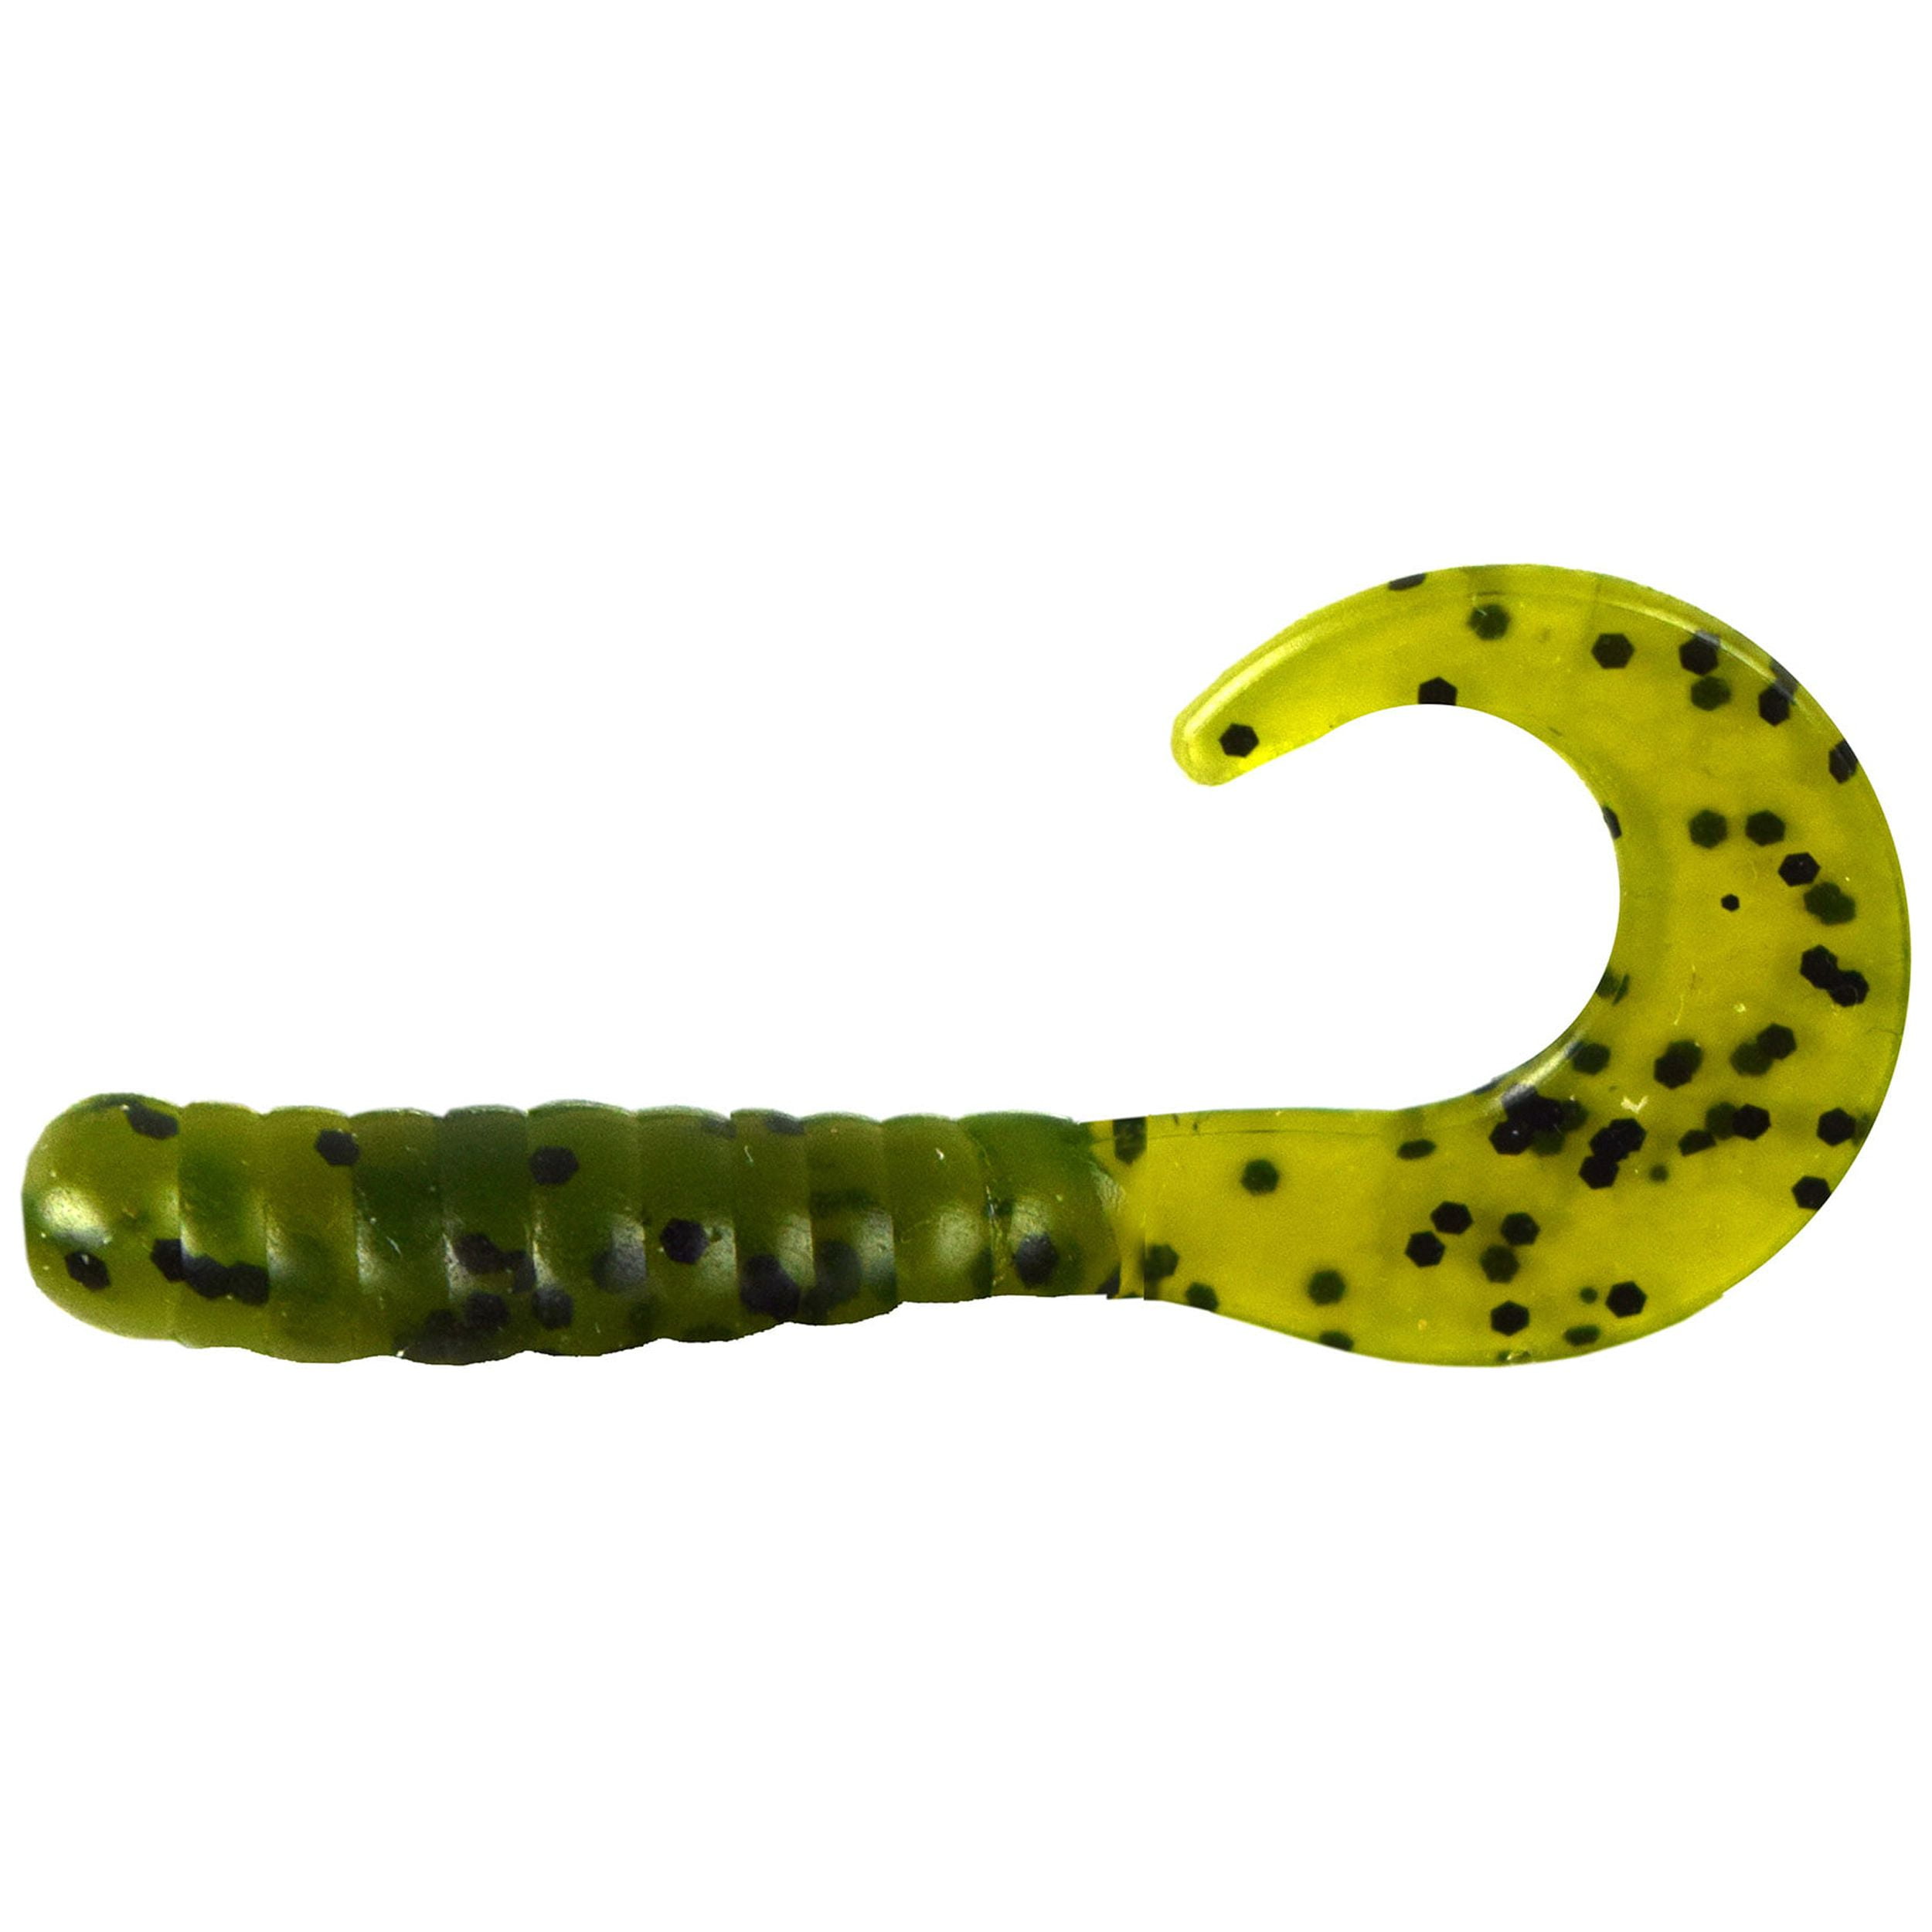 Tackle HD 70-Pack Grub Fishing Lures, 3-Inch Skirted Grub with Curly Tail,  Bulk Fishing Grubs for Crappie, Bass, Walleye, or Trout Bait, Freshwater or  Saltwater Swimbait, Watermelon Seed 